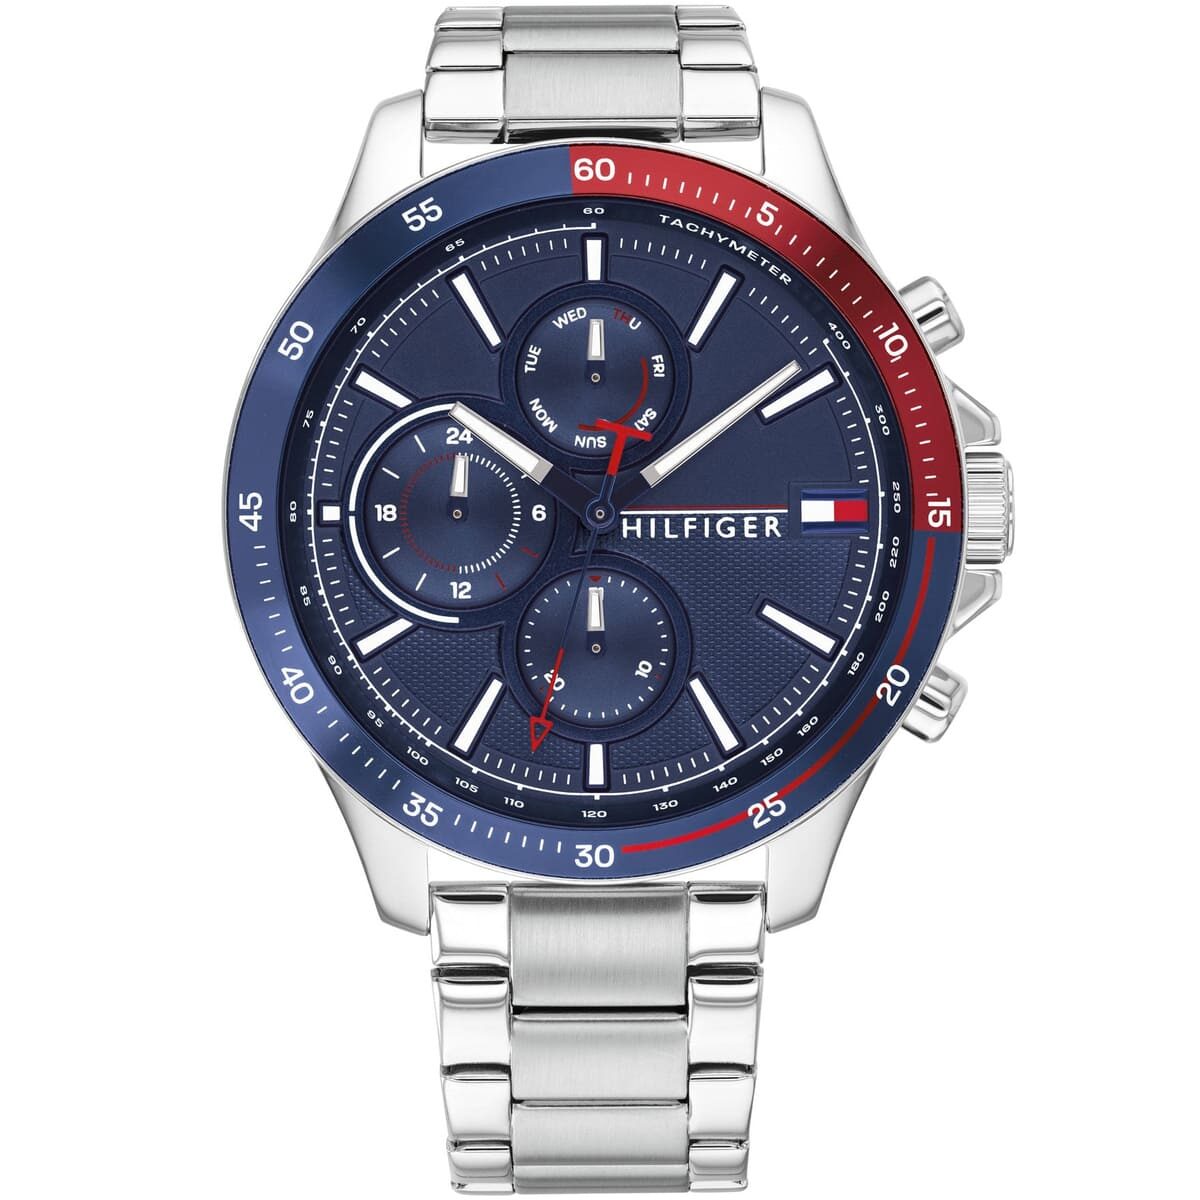 1791718-tommy-hilfiger-watch-men-blue-dial-stainless-steel-metal-silver-strap-quartz-analog-day-date-month-bank